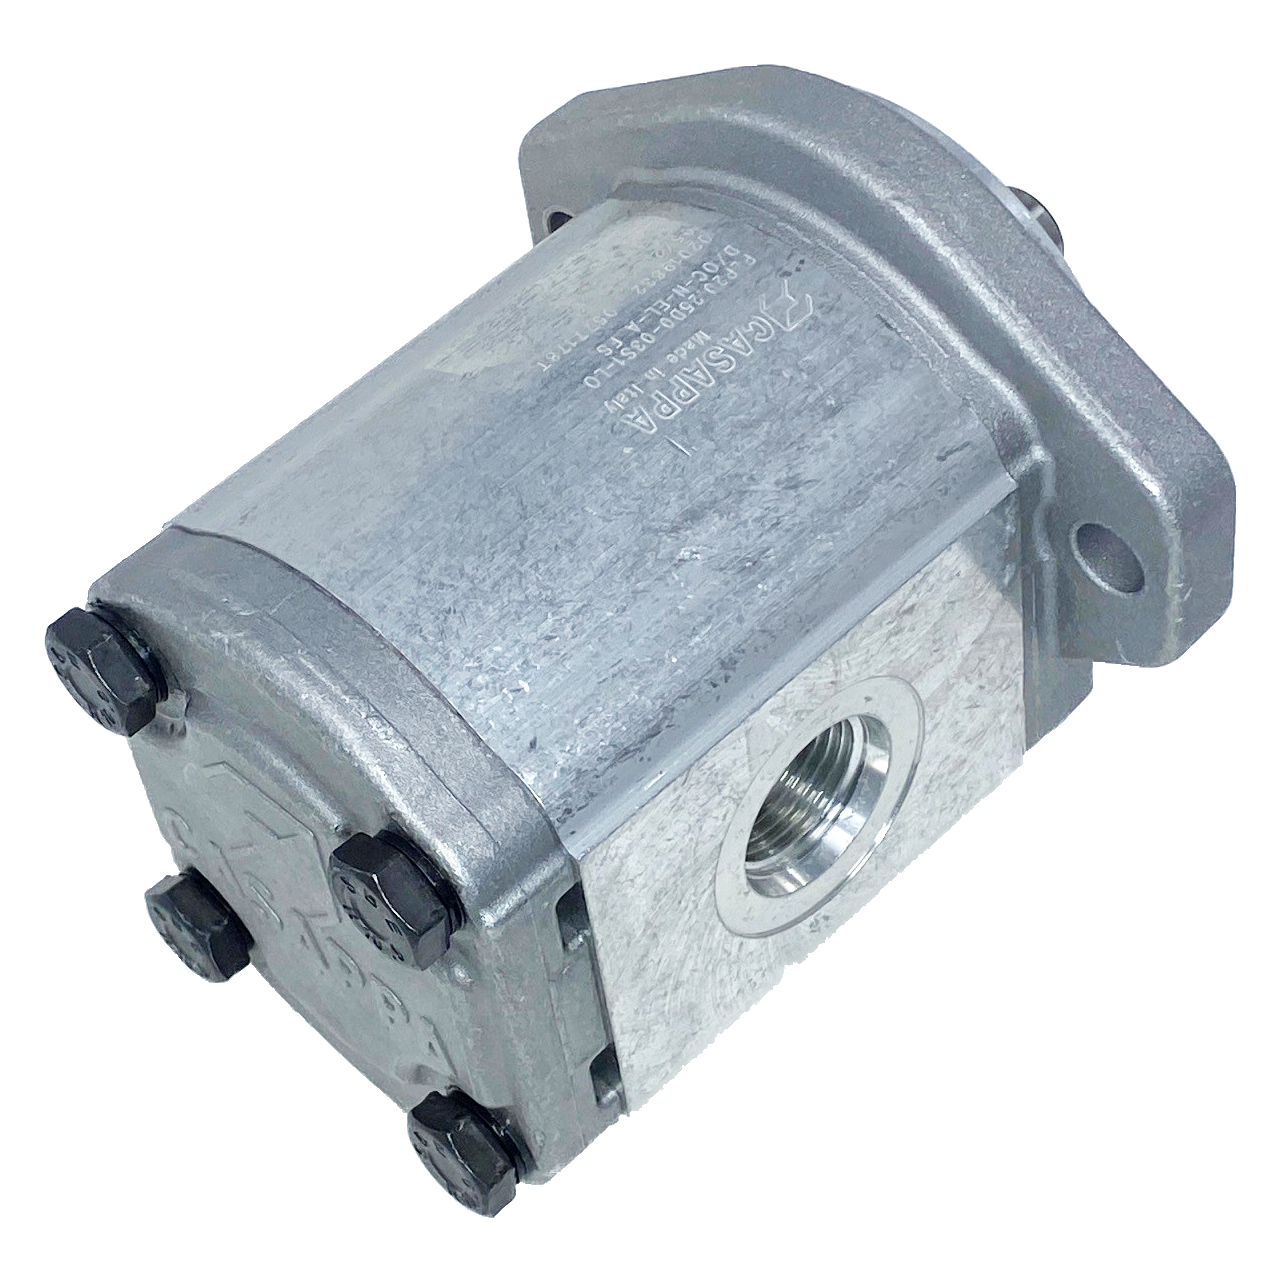 PHP20.25S0-31S9-LOG/OC-N-EL : Casappa Polaris Gear Pump, 26.42cc, 3335psi Rated, 3000RPM, CCW, 5/8" Bore x 5/32" Key Shaft, SAE A 2-Bolt Flange, 1.25" #20 SAE Inlet, 0.625 (5/8") #10 SAE Outlet, Cast Iron Body, Aluminum Flange